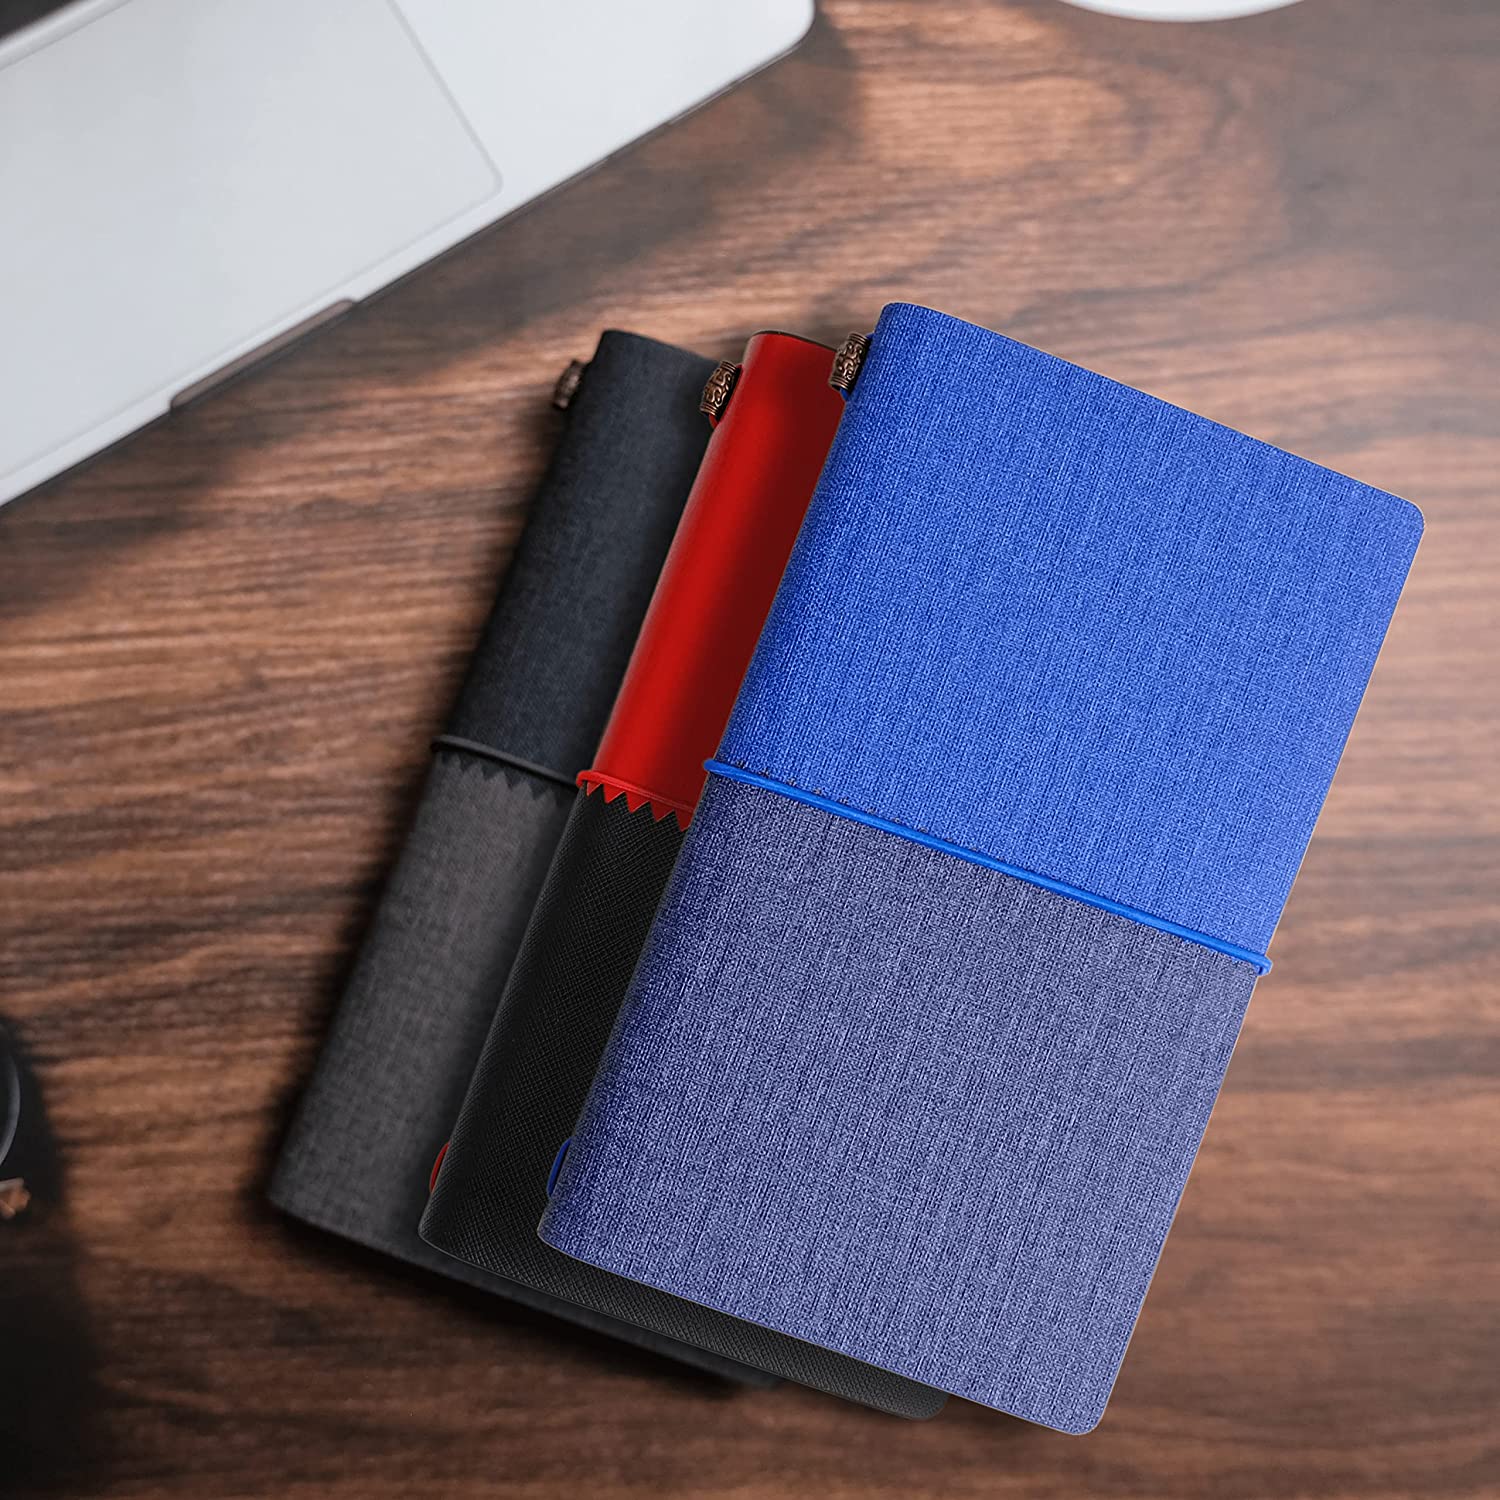 Durmukha BIBELOT PU Leather Travelers Writing Journal Notebook with Lined Pages and Card Holders (Black/Red/Blue)